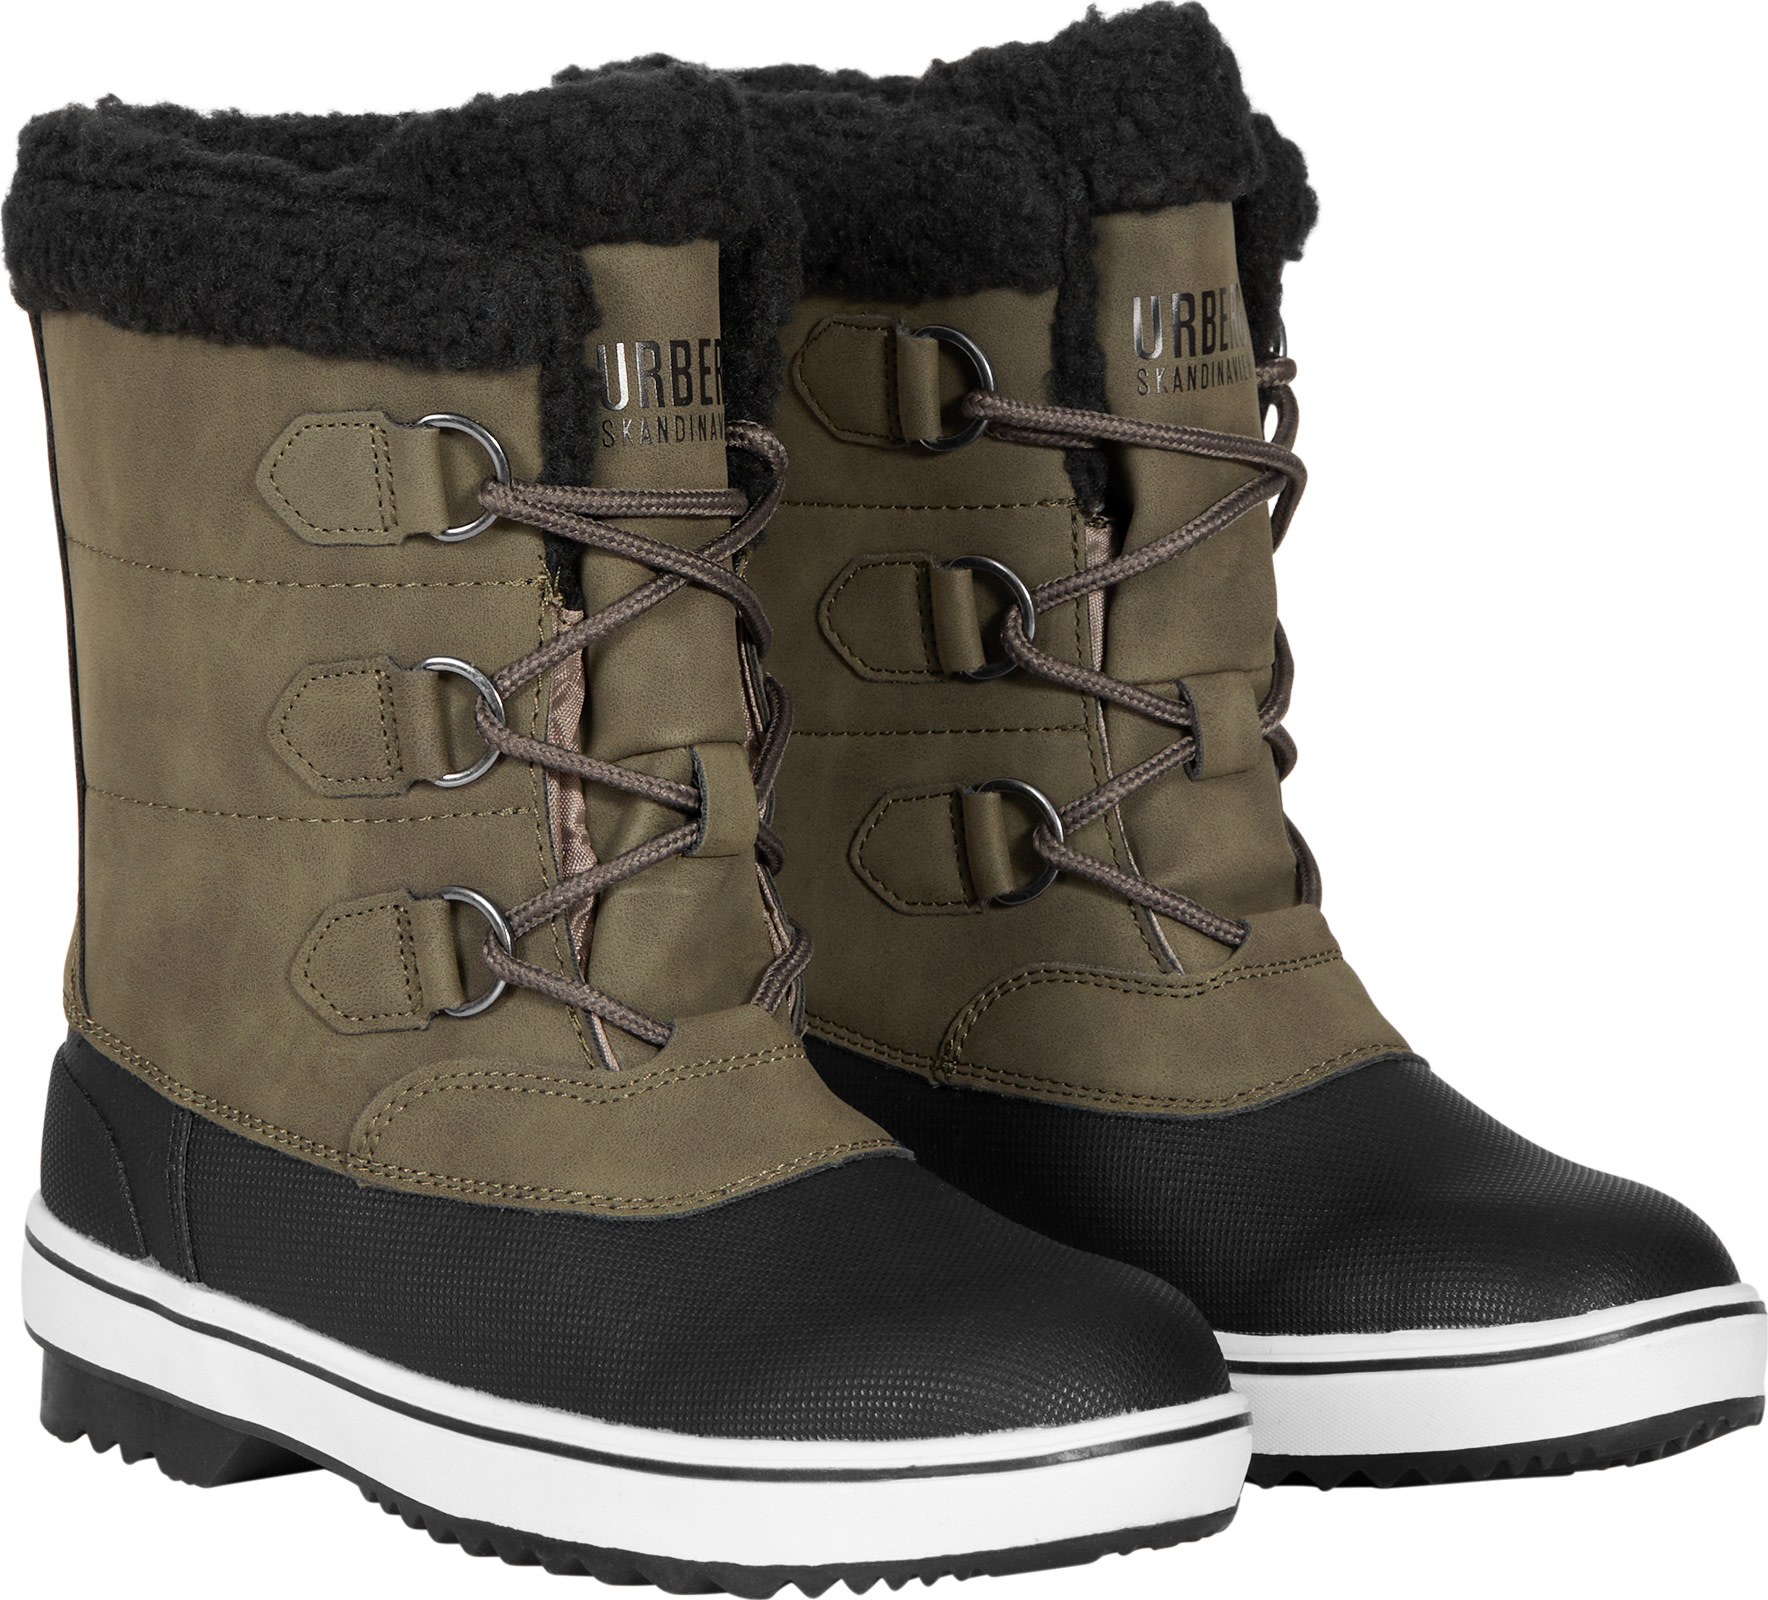 Urberg Kids' Winter Boots Capers 30, Capers